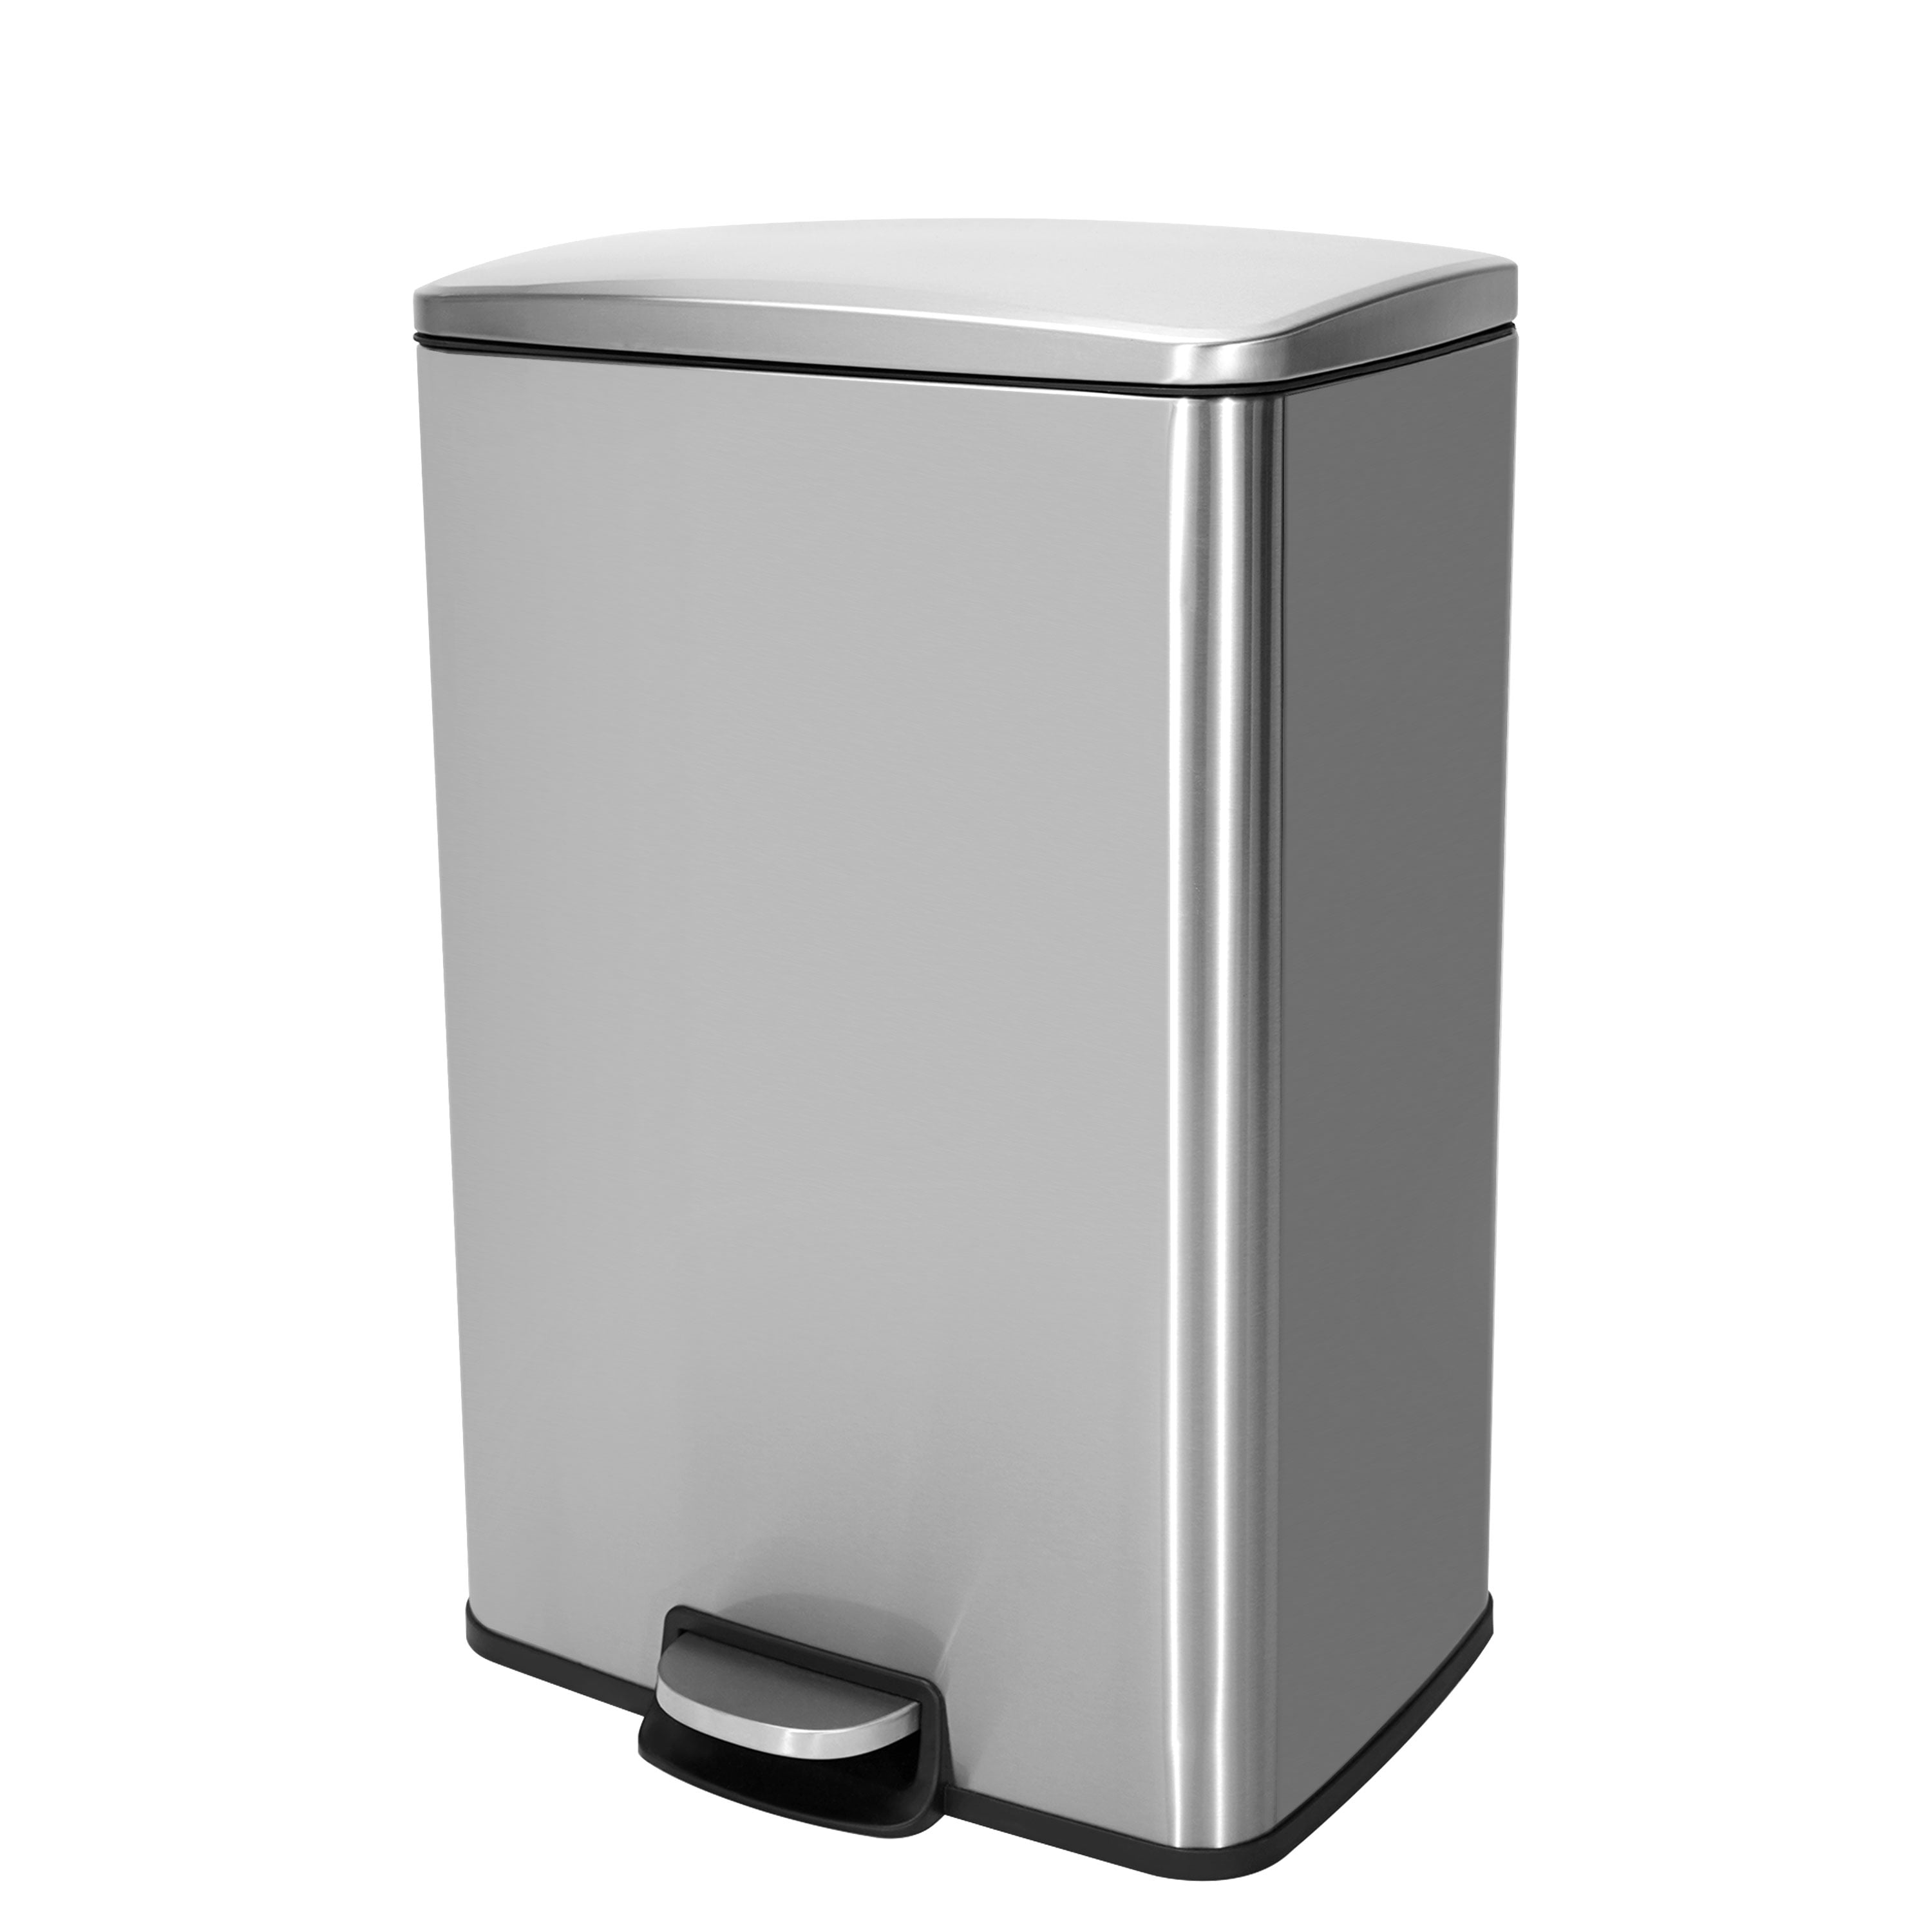 Innovaze 13 Gallon Stainless Steel Step Rectangular Kitchen Trash Can Rectangular Stainless Steel Trash Can